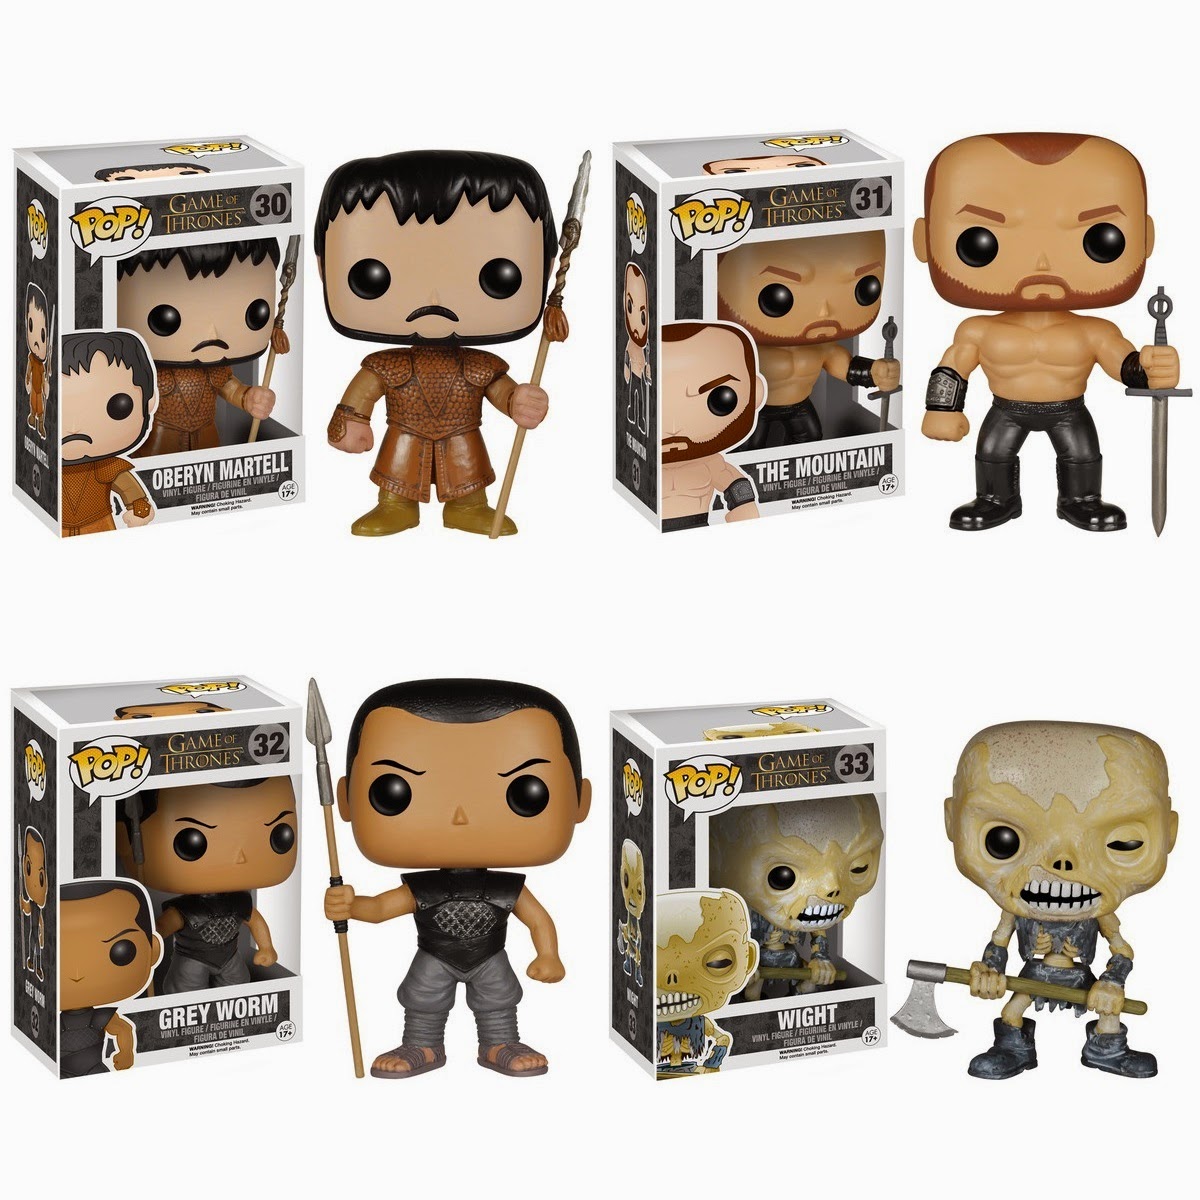 Game of Thrones Pop! Series 5 by Funko - Oberyn Martell, The Mountain, Grey Worm of the Unsullied & a Wight